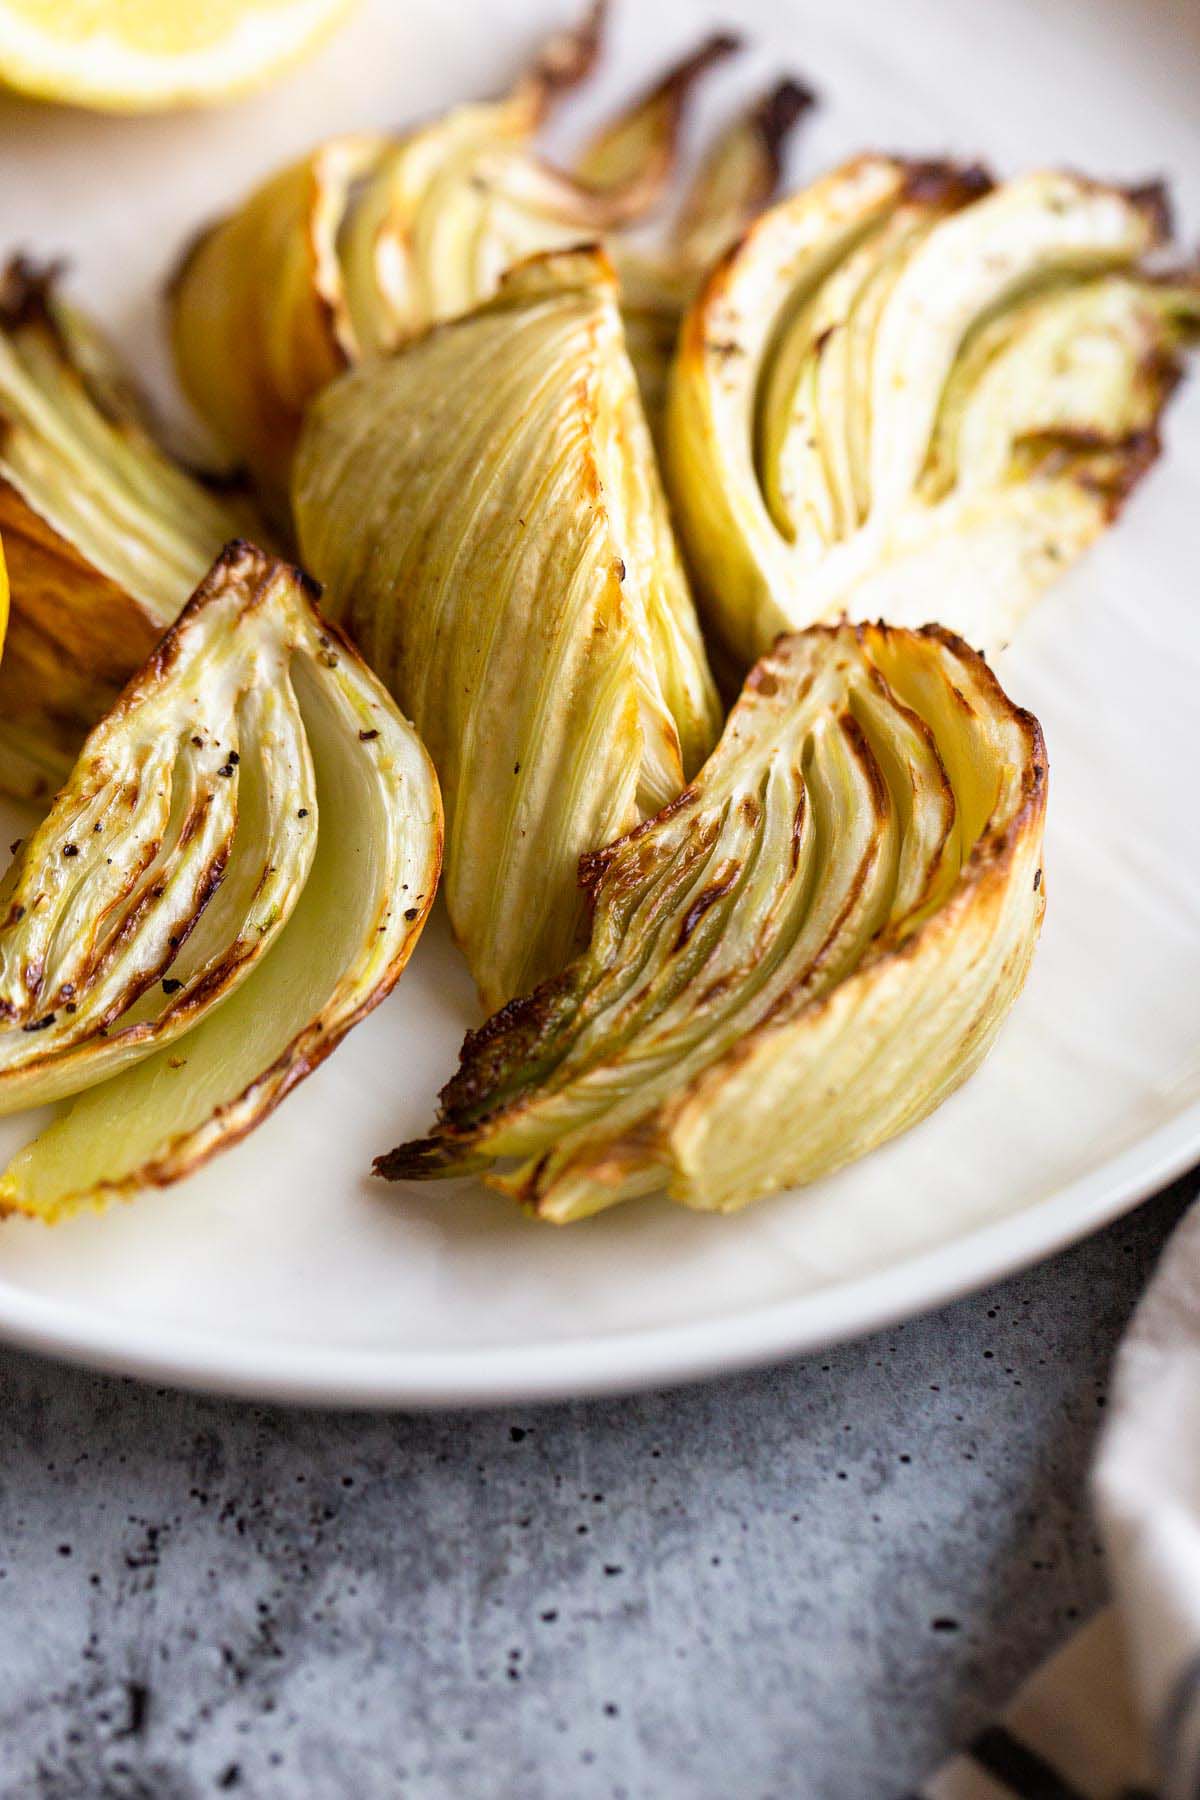 Roasted fennel on a plate.